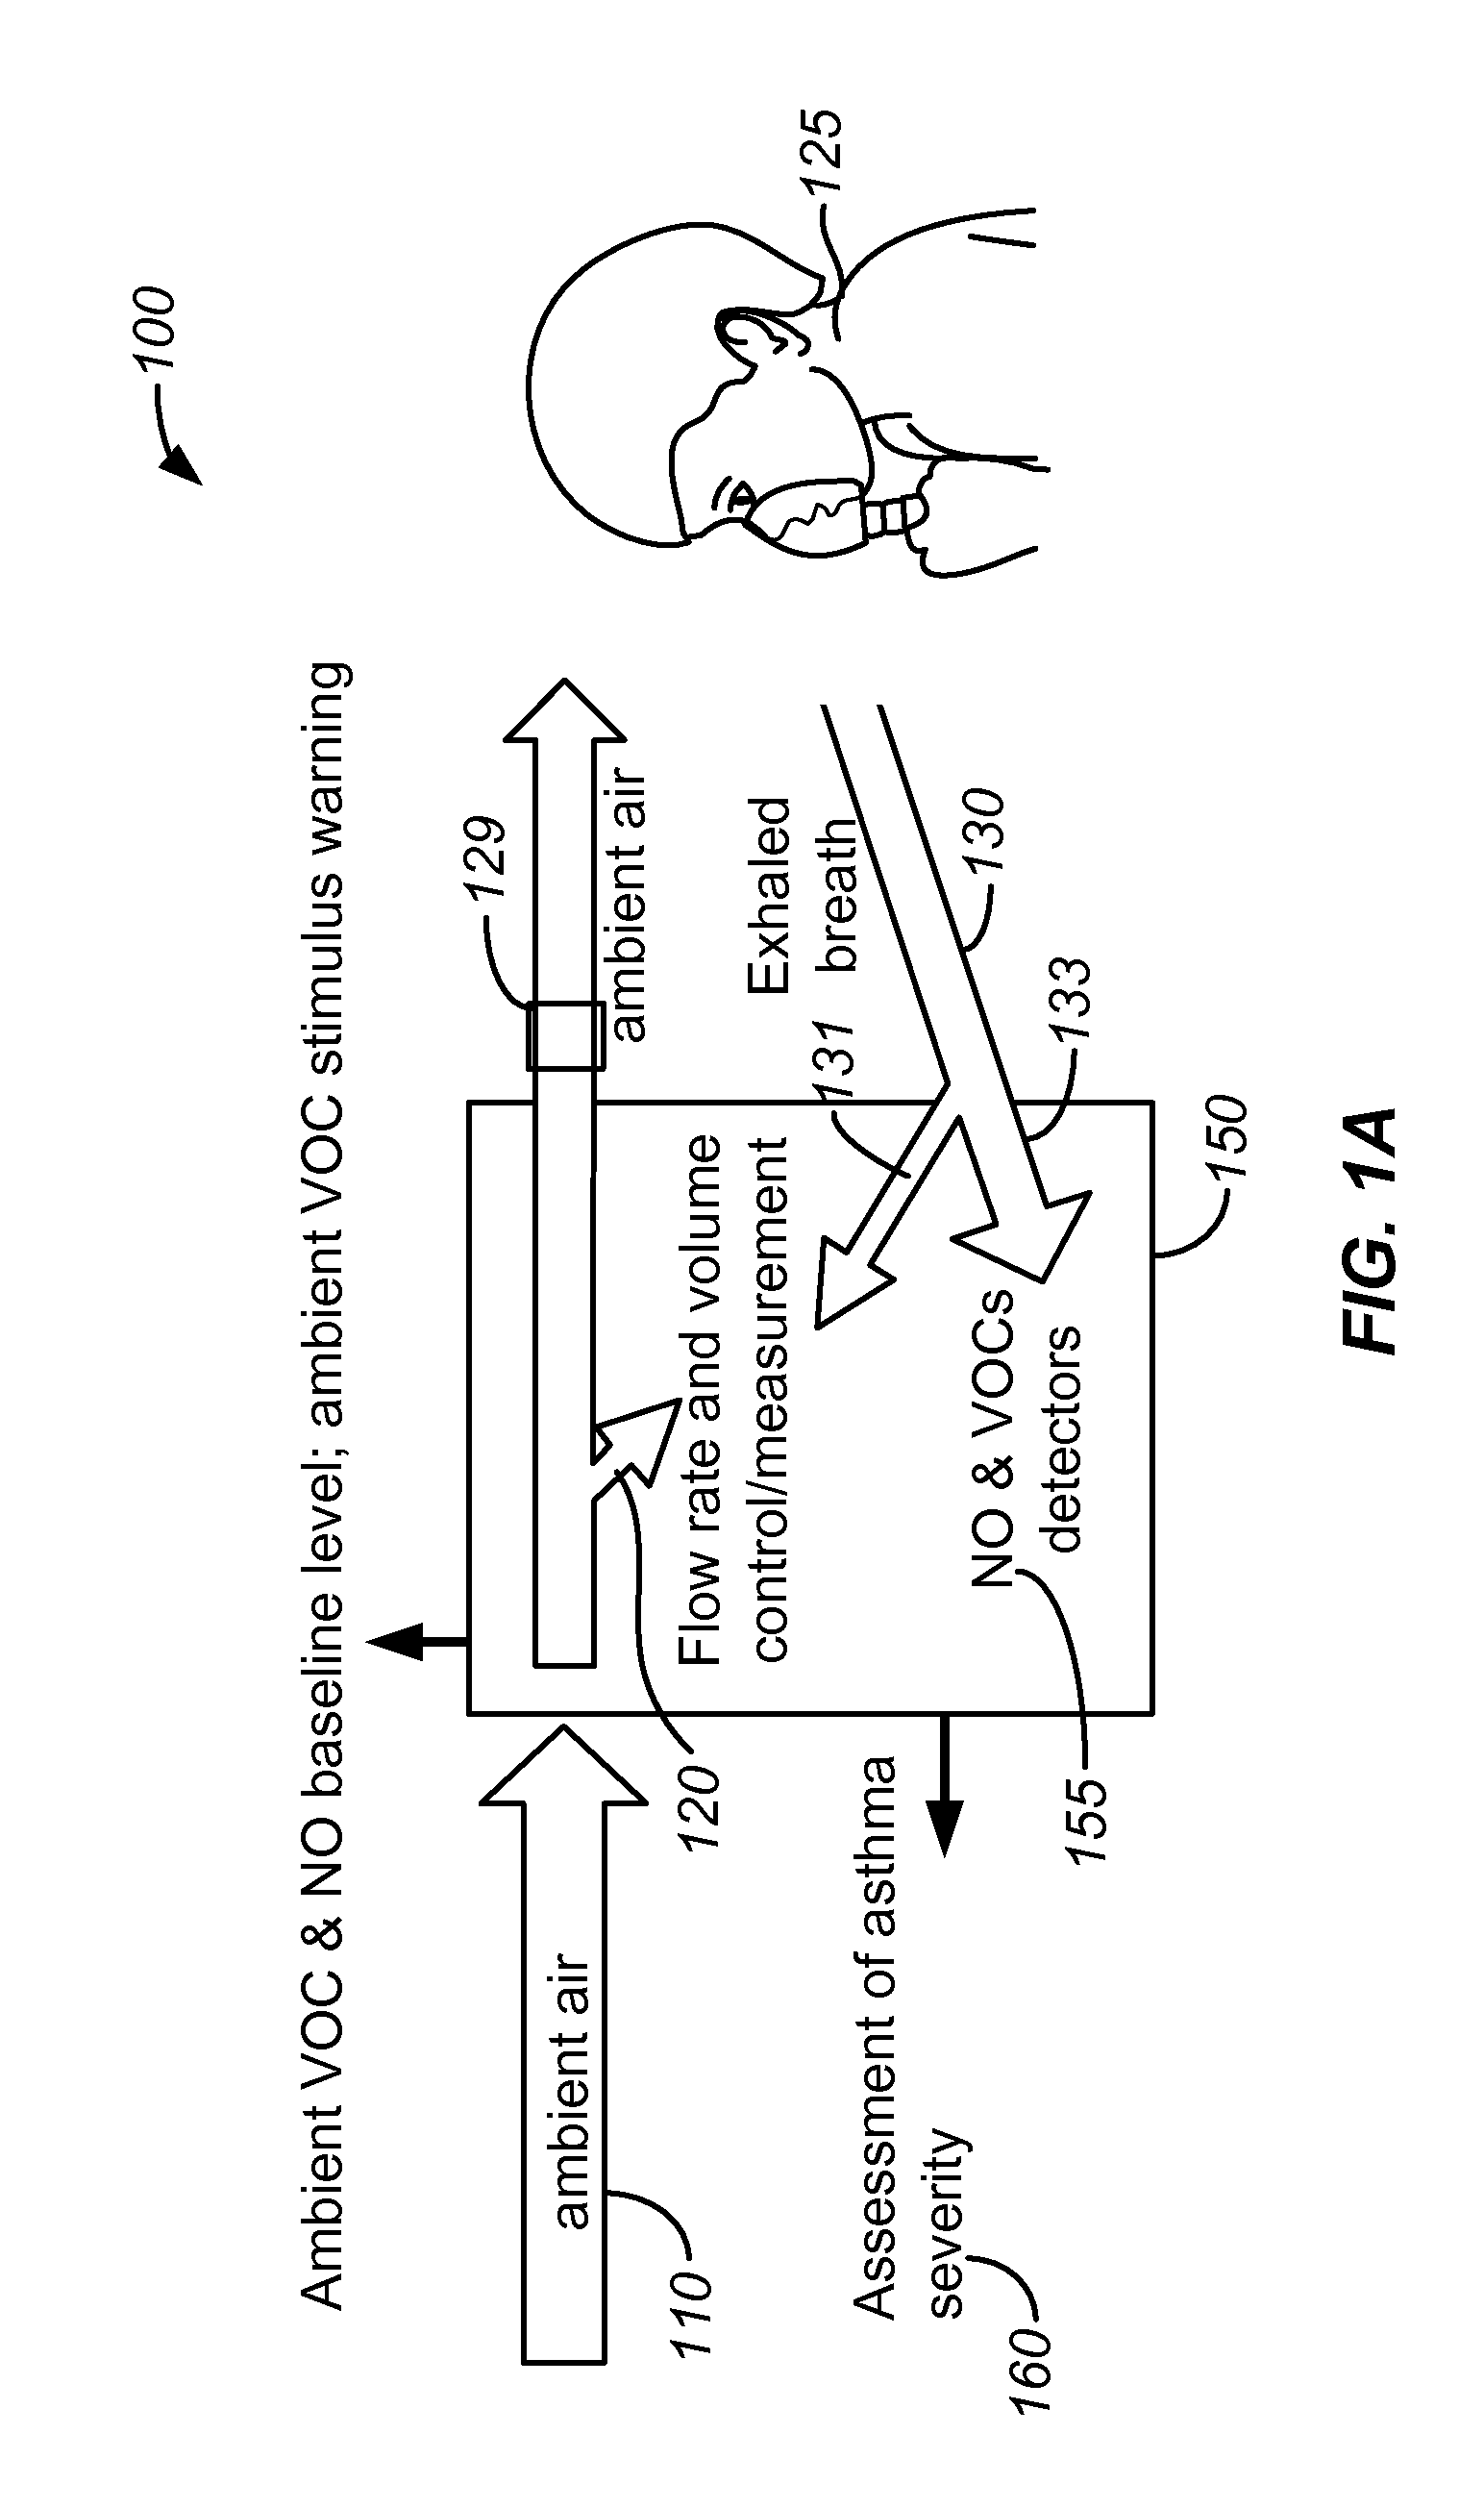 Breath analysis systems and methods for asthma, tuberculosis and lung cancer diagnostics and disease management